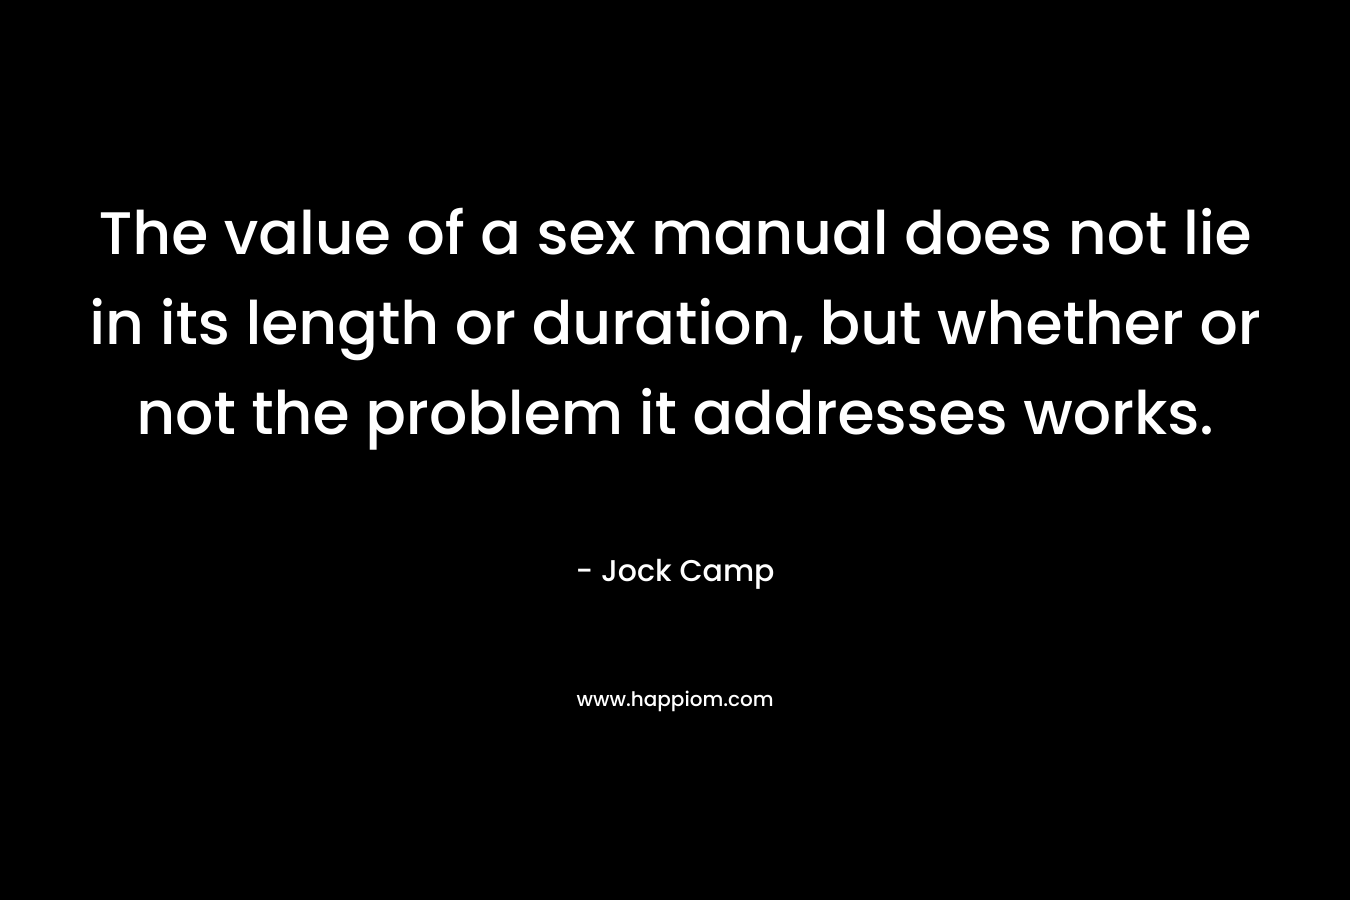 The value of a sex manual does not lie in its length or duration, but whether or not the problem it addresses works.